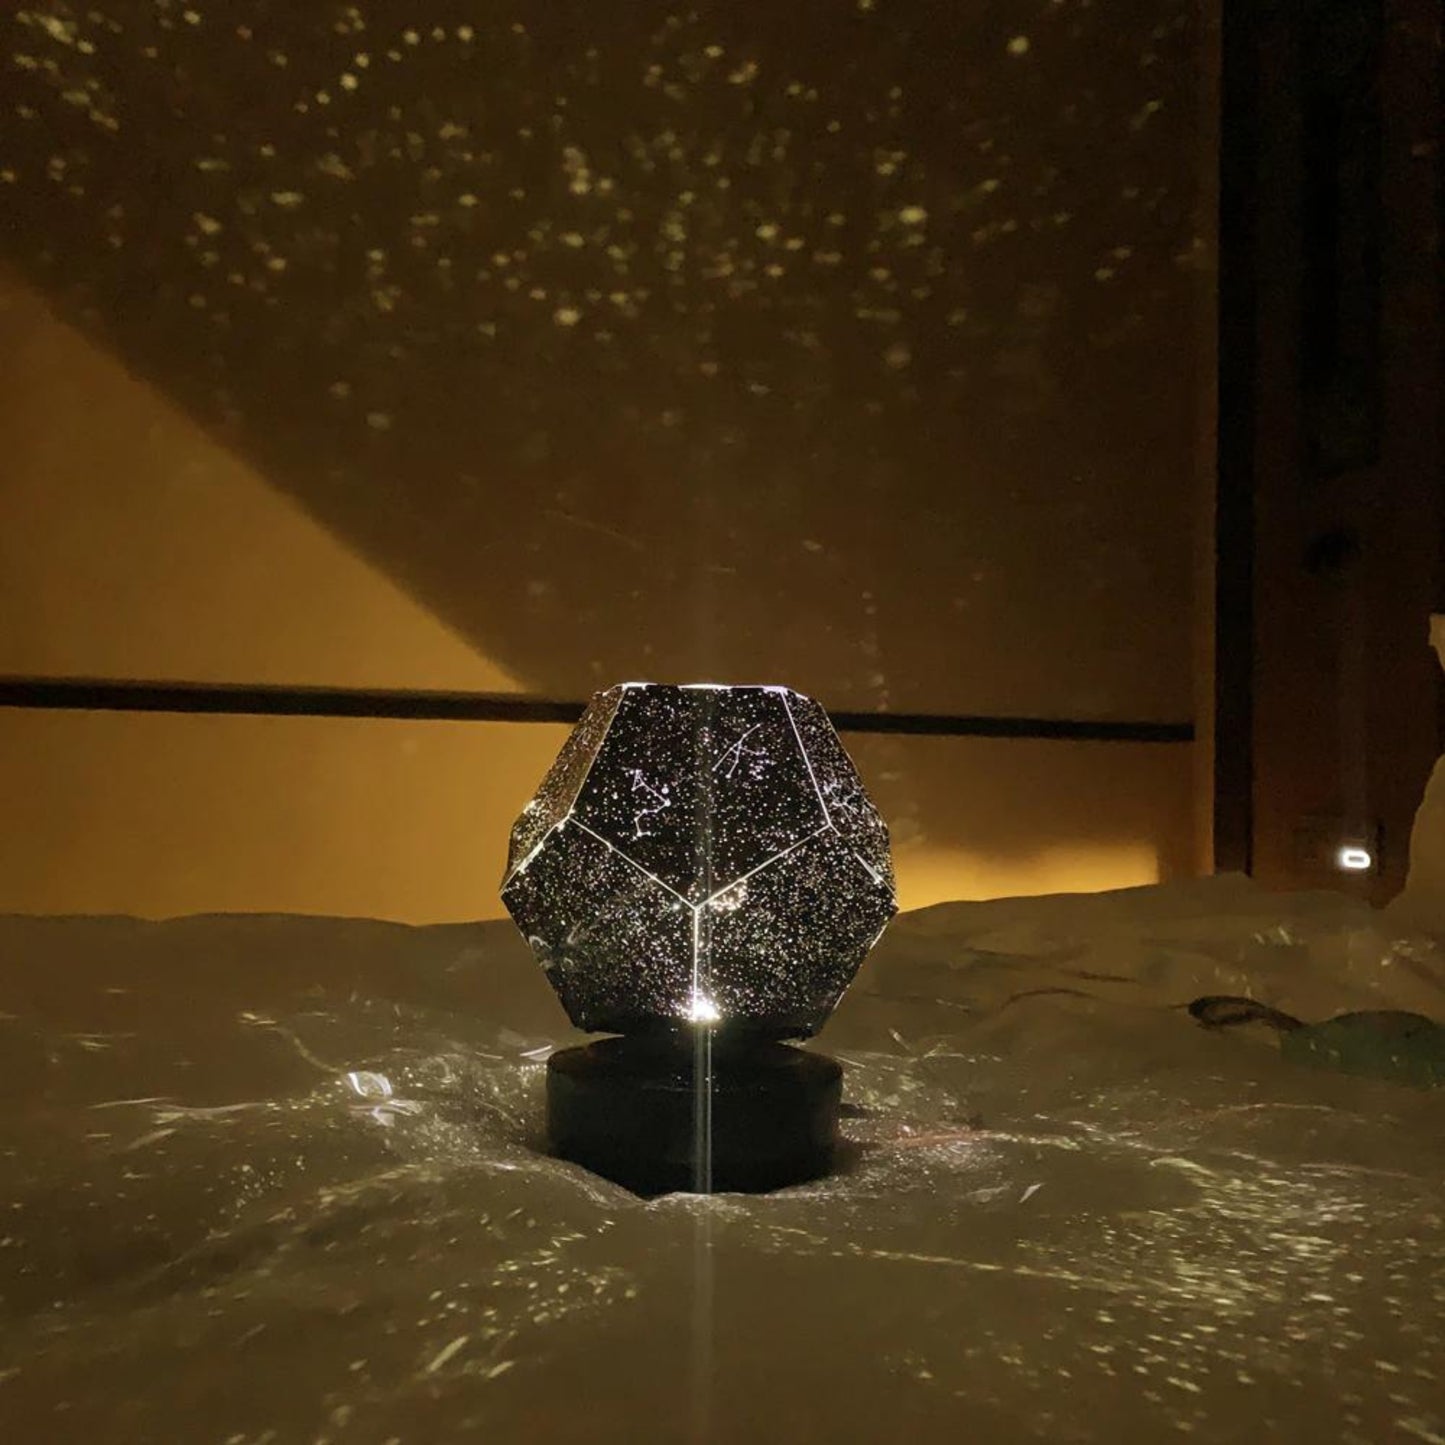 Dodecahedron Constellation Projector